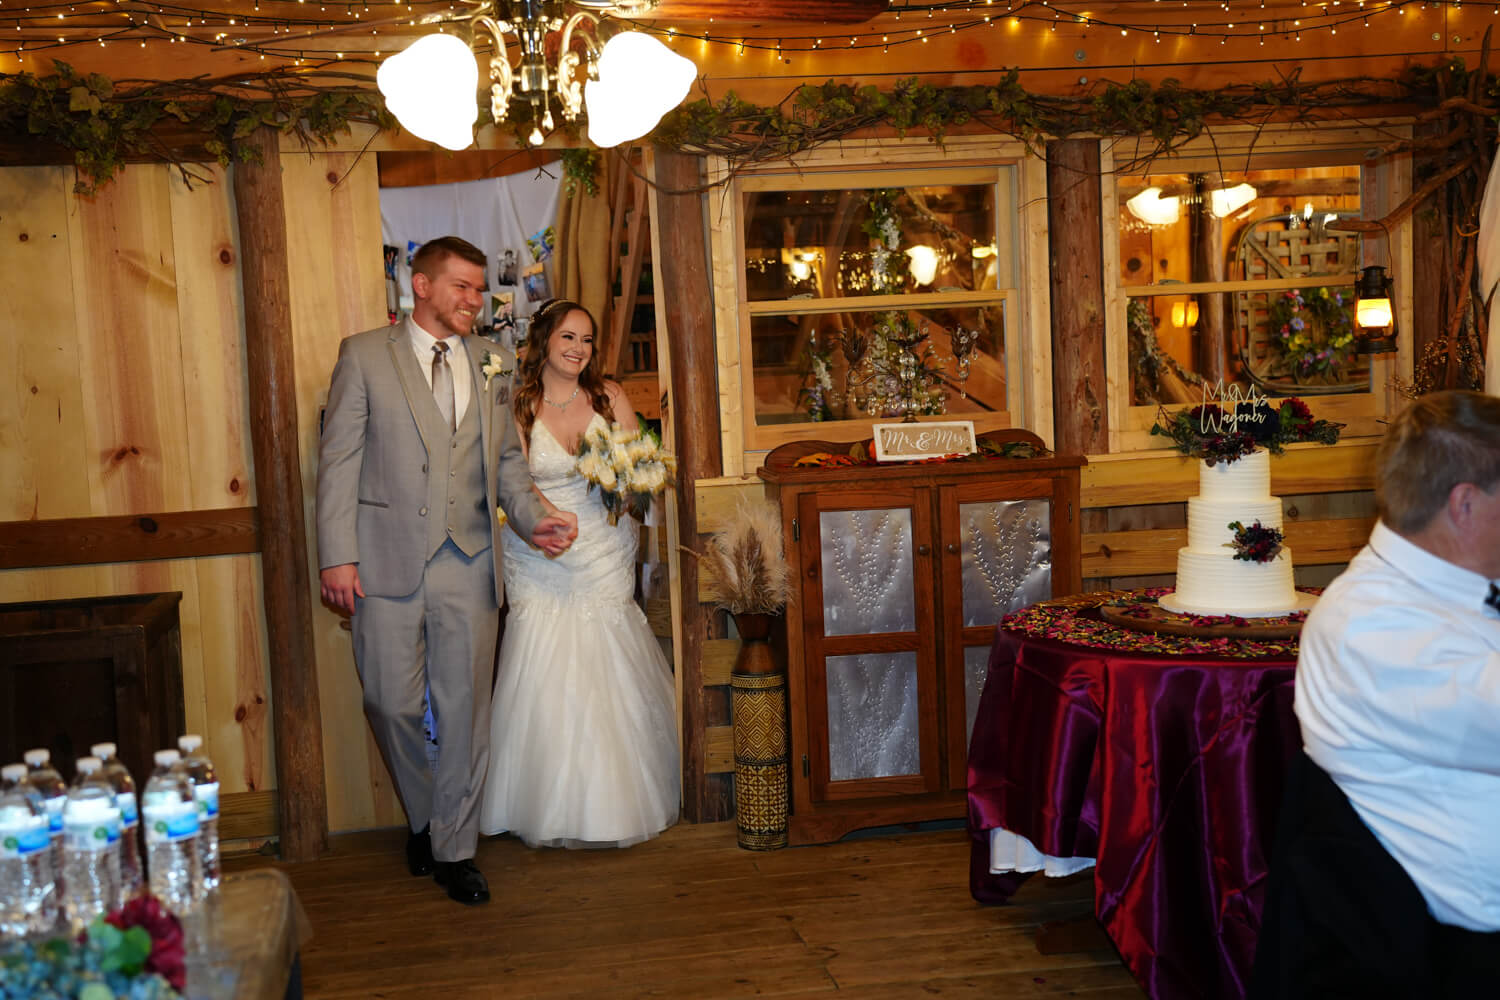 Bride and groom entering the reception area of a barn wedding venue in Pigeon Forge with country chic decor